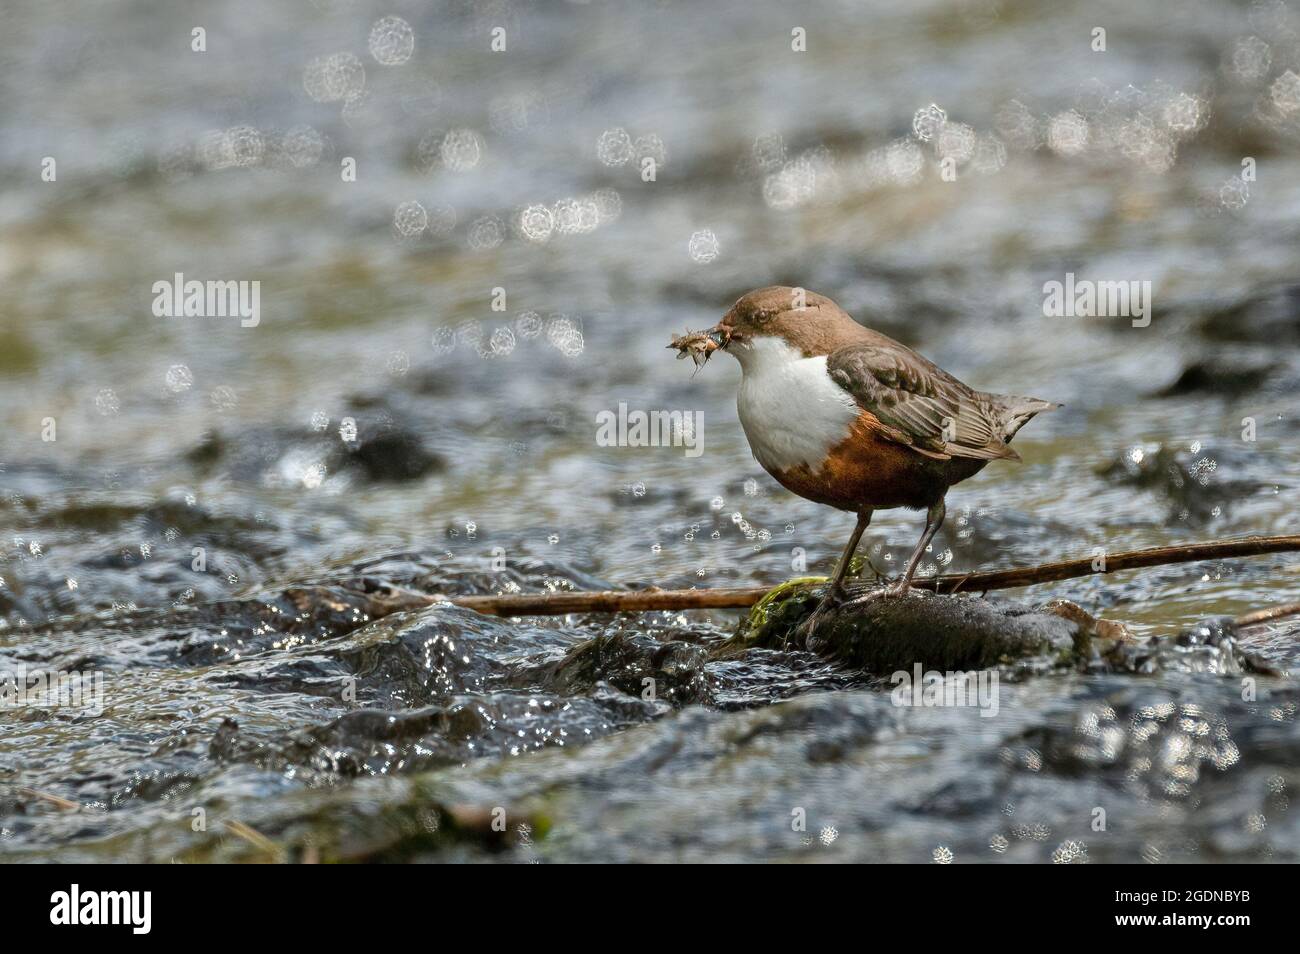 Dipper Catching Insects in River Stock Photo